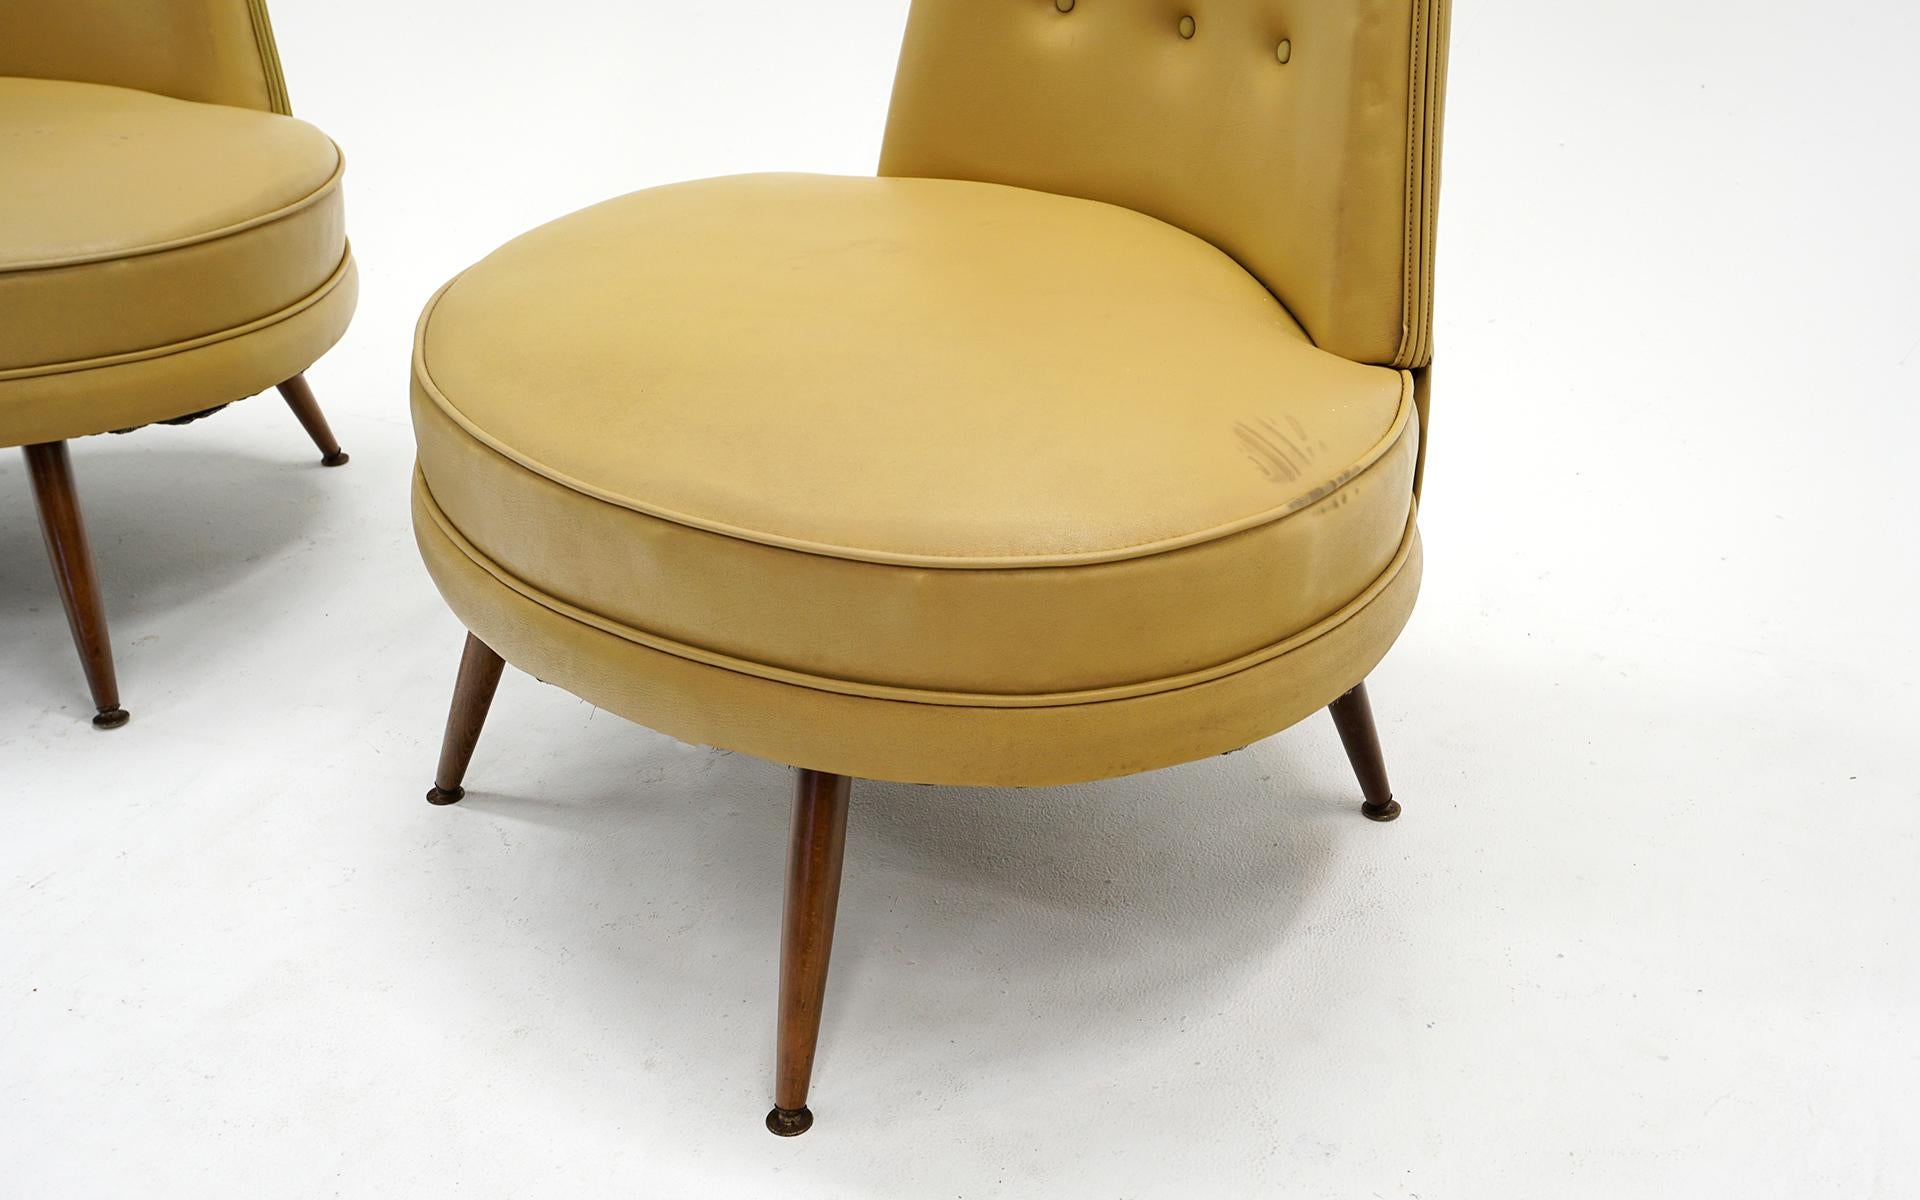 Striking pair of armless slipper chairs in the original mustard yellow vinyl. Walnut legs with brass caps. These can be used as is but we have them priced expecting the new owner may want to reupholster them. The wide seat, high back and splayed